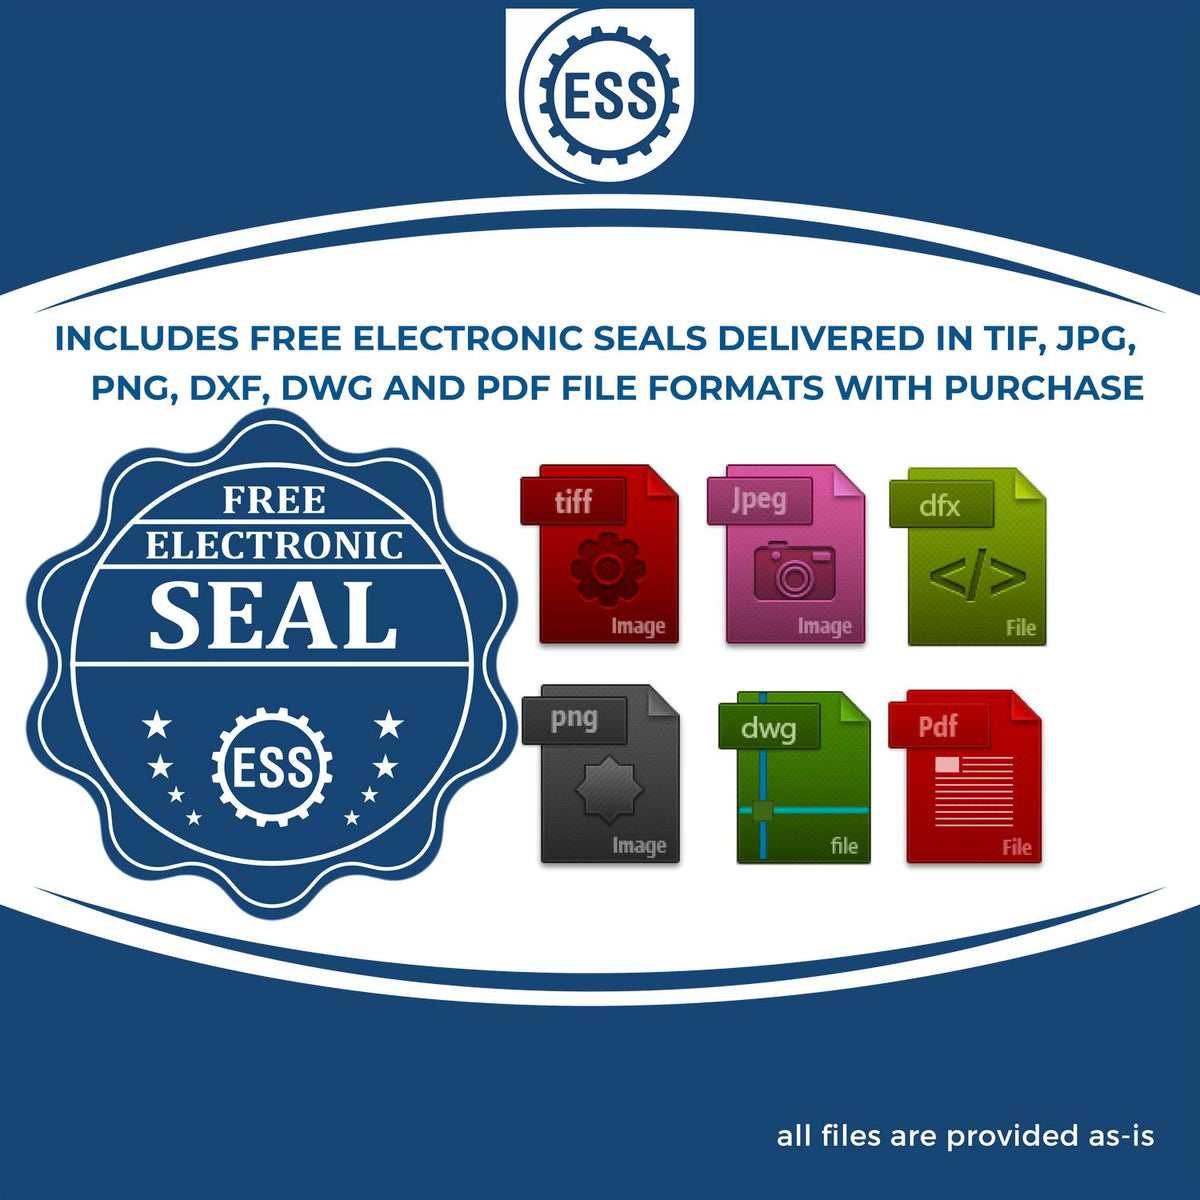 An infographic for the free electronic seal for the New Hampshire Geologist Desk Seal illustrating the different file type icons such as DXF, DWG, TIF, JPG and PNG.